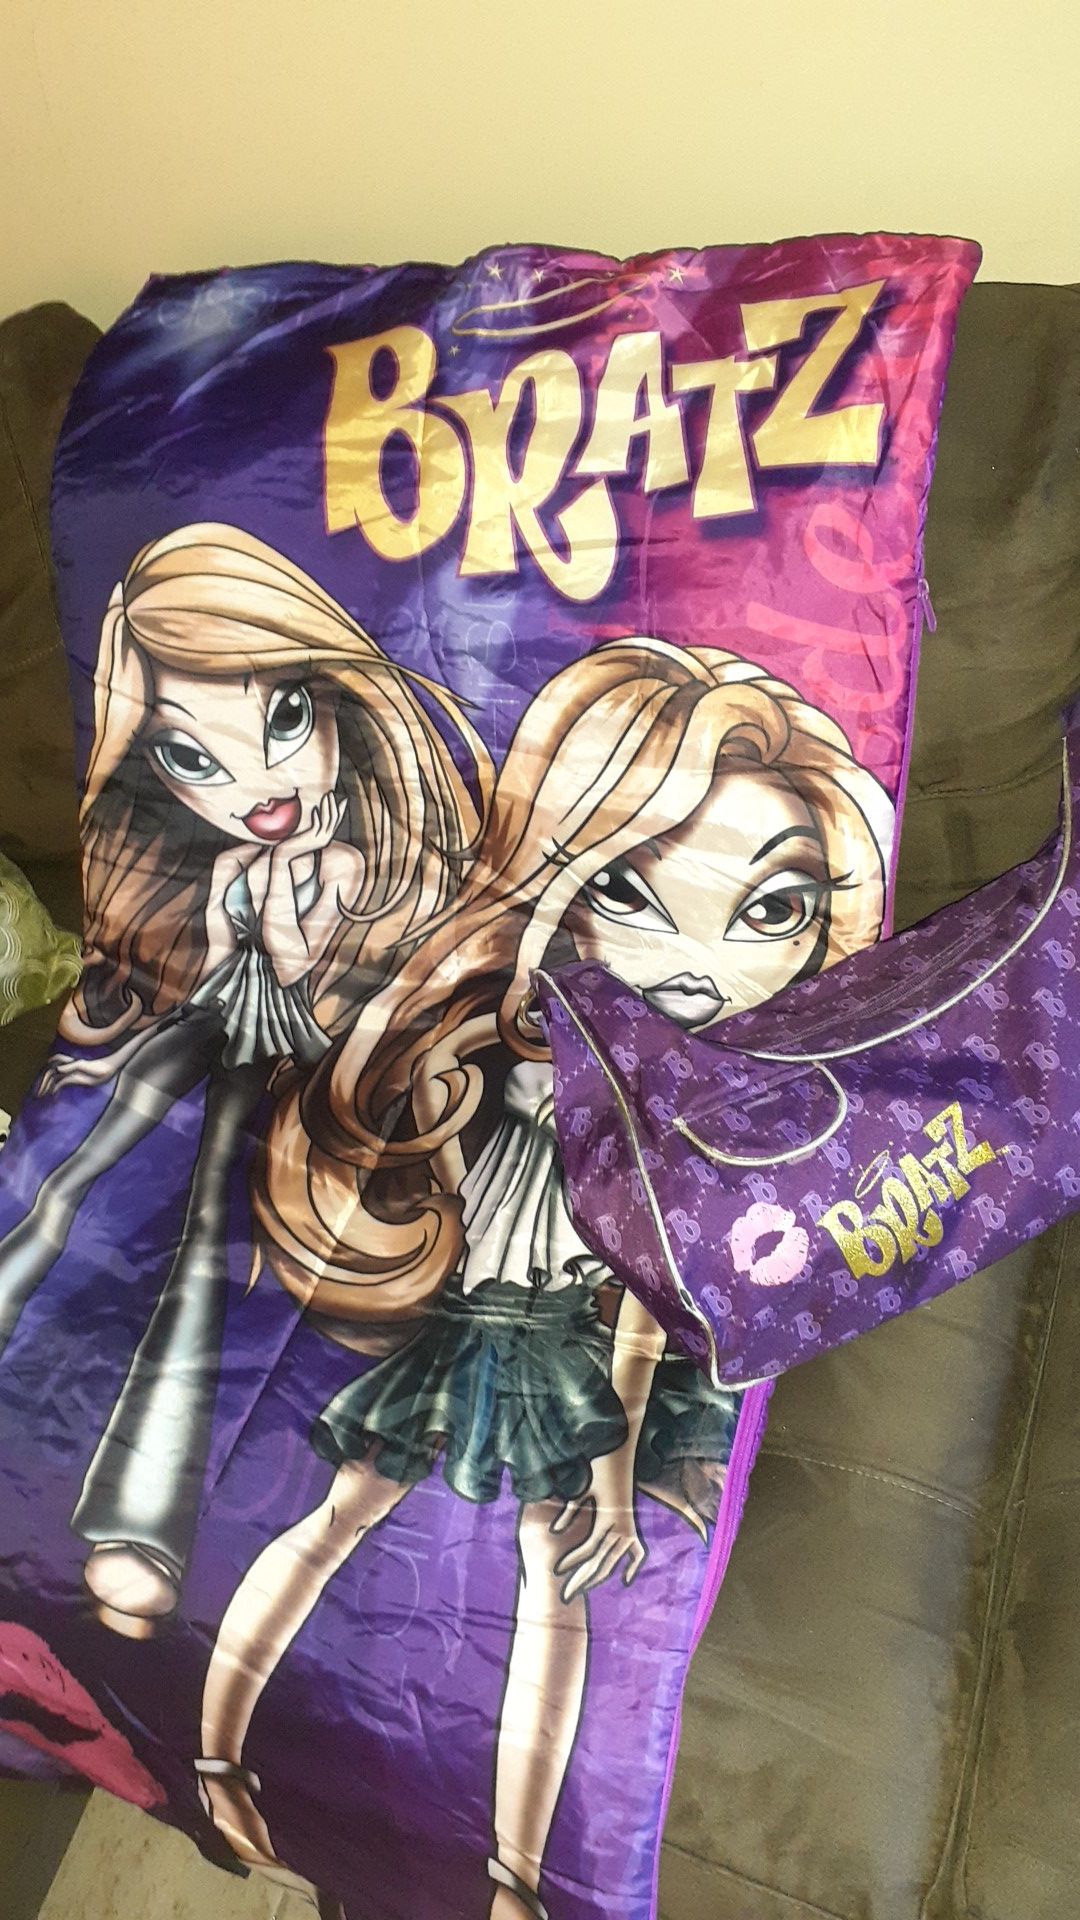 Bratz sleeping bag. Never used. .make me an offer I can't refuse 🙂